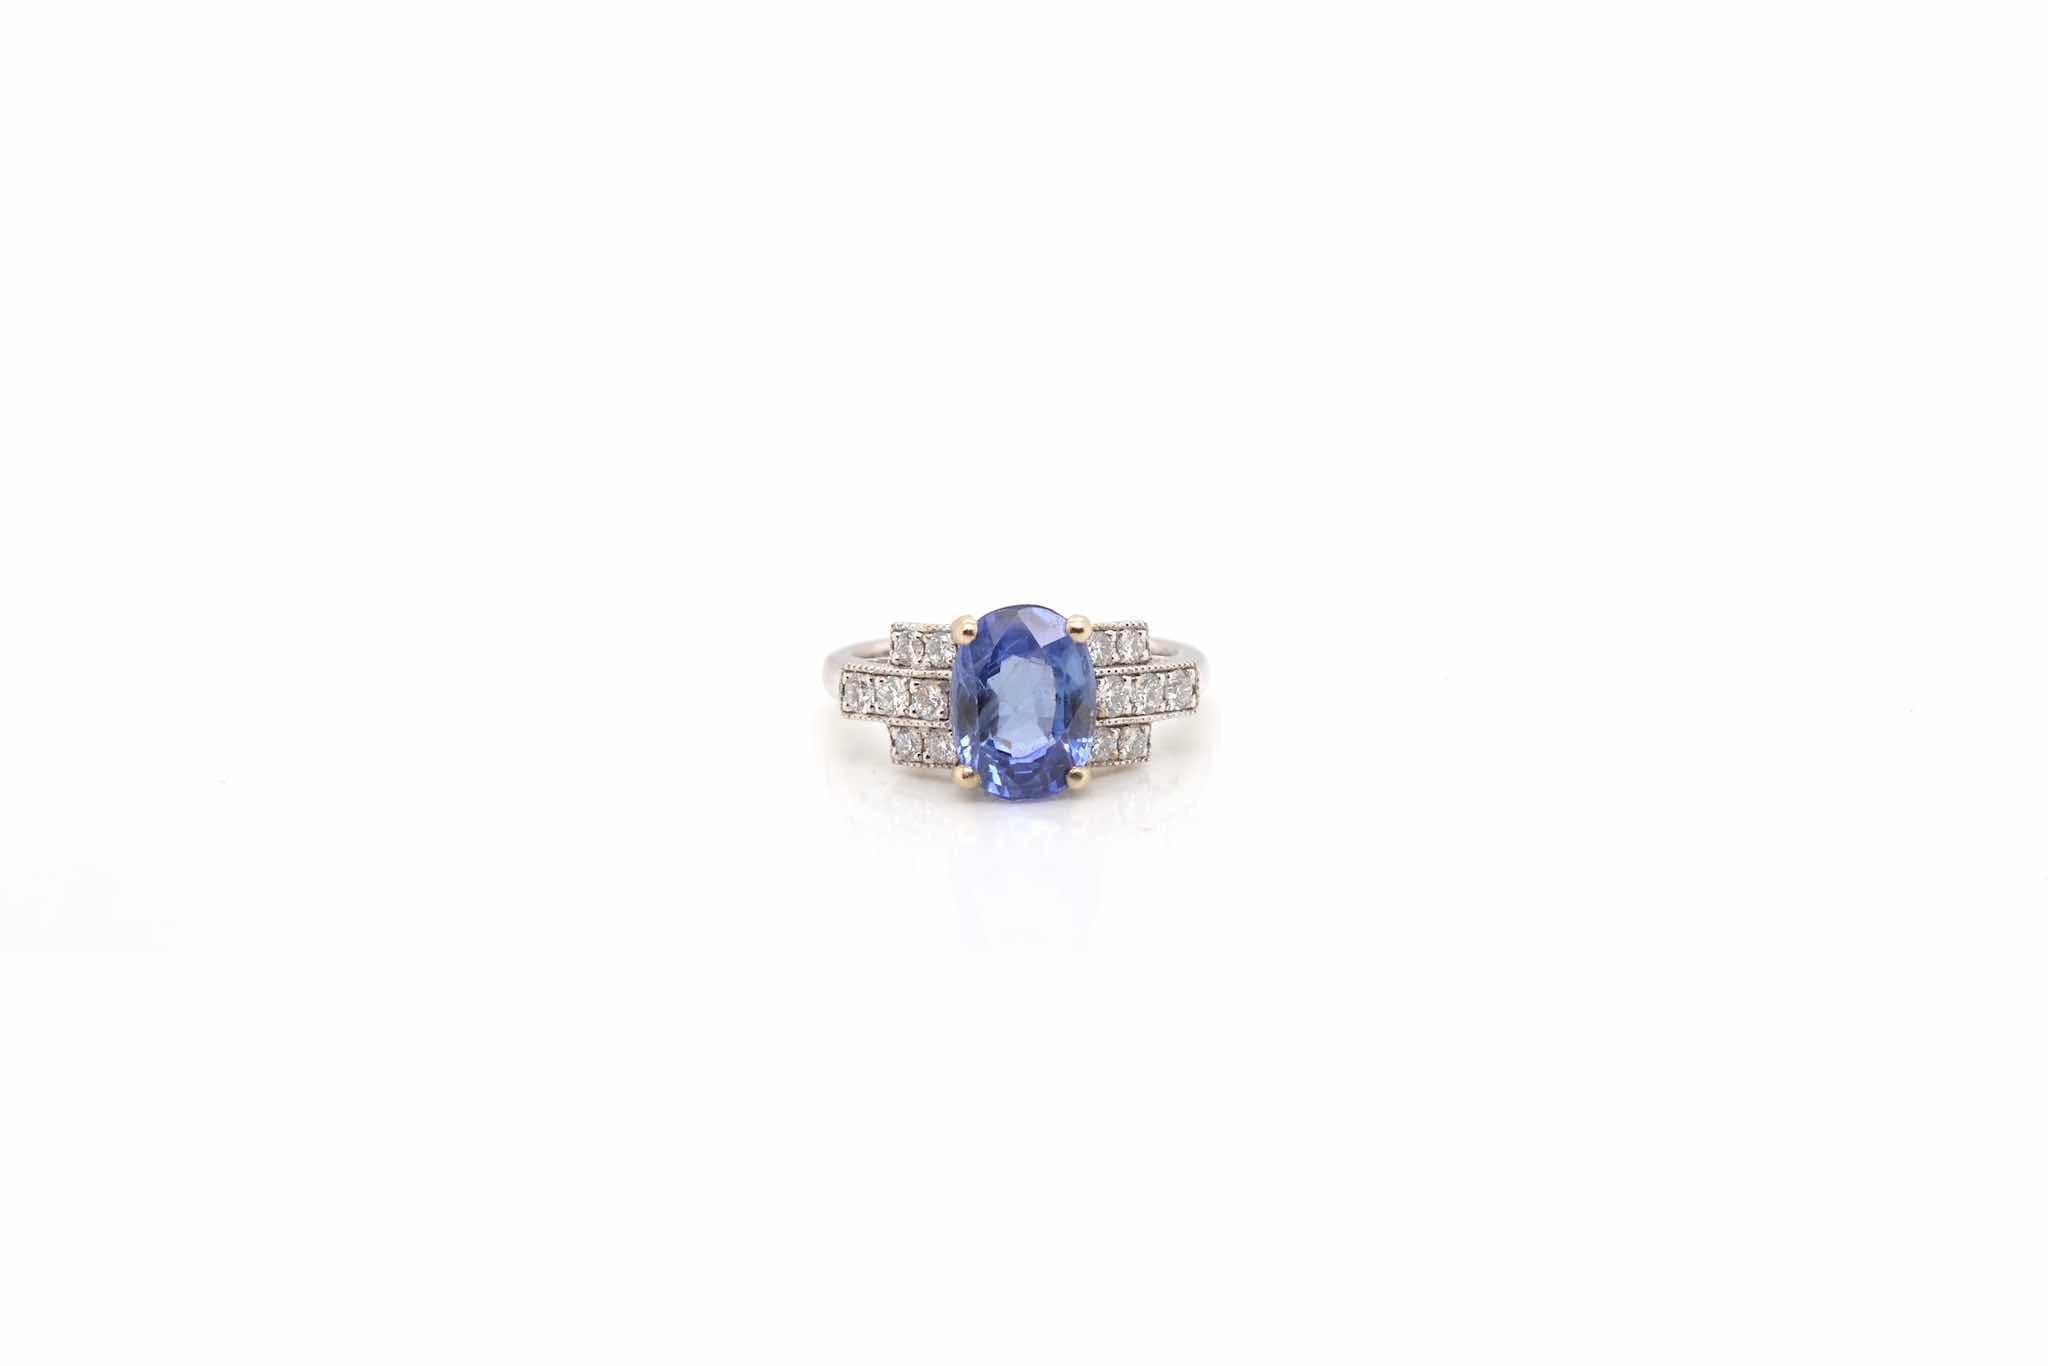 Stones: 3.77 carats Ceylon Sapphire, unheated
and brilliant diamonds for a total weight of 0.37 carats.
Material: 18k white gold
Dimensions: 9 mm length on finger
Weight: 5.4g
Size: 52 (free sizing)
– Laboratory certificate
Certificate
Ref. : 23497